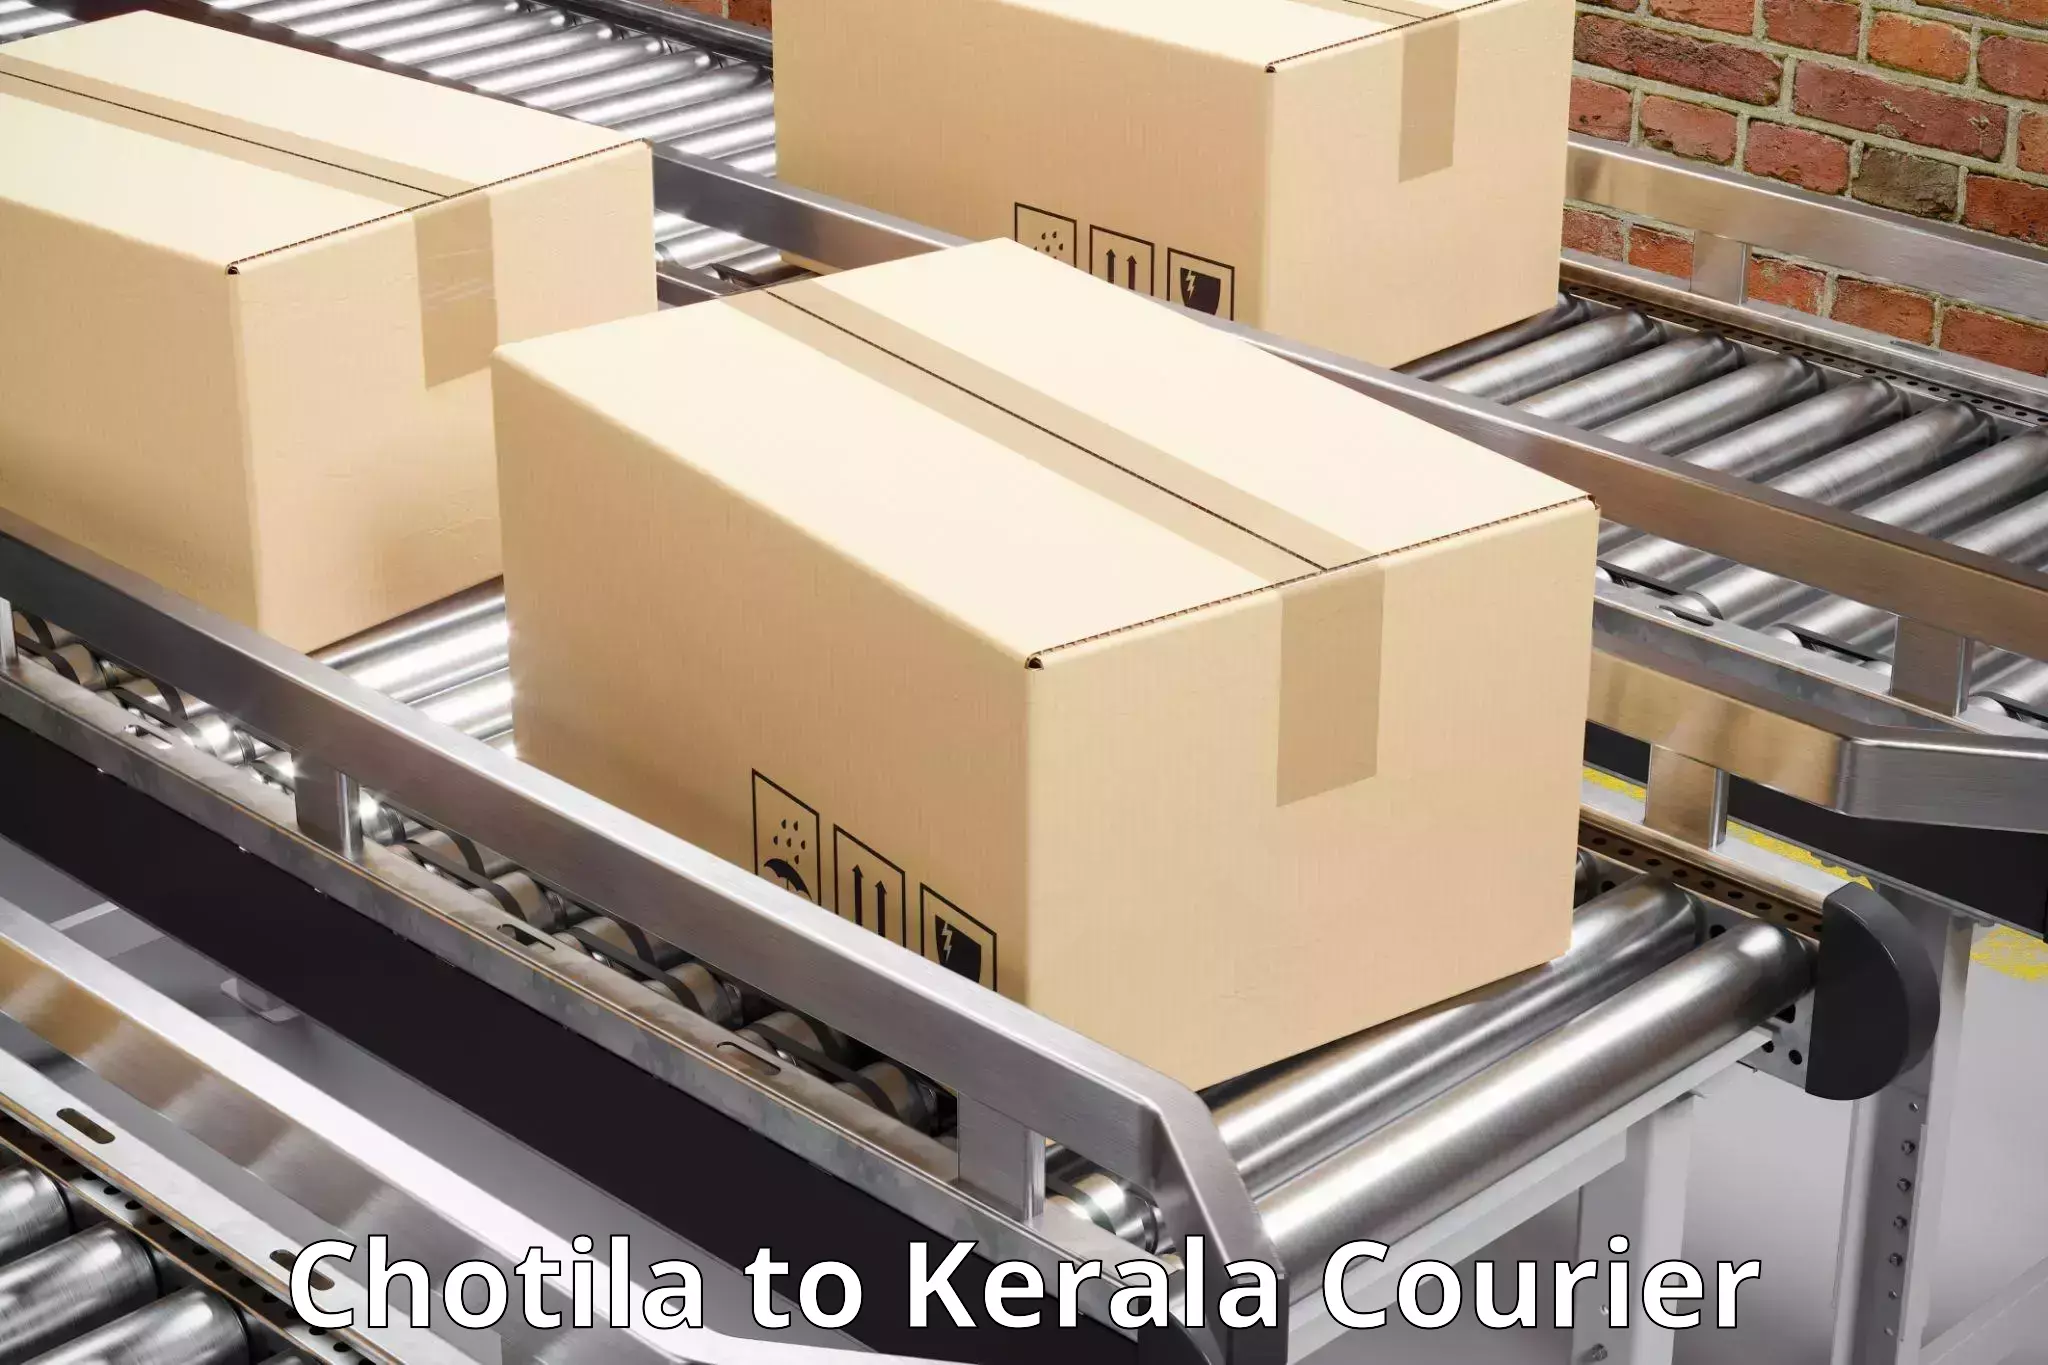 Nationwide shipping services Chotila to Cochin University of Science and Technology